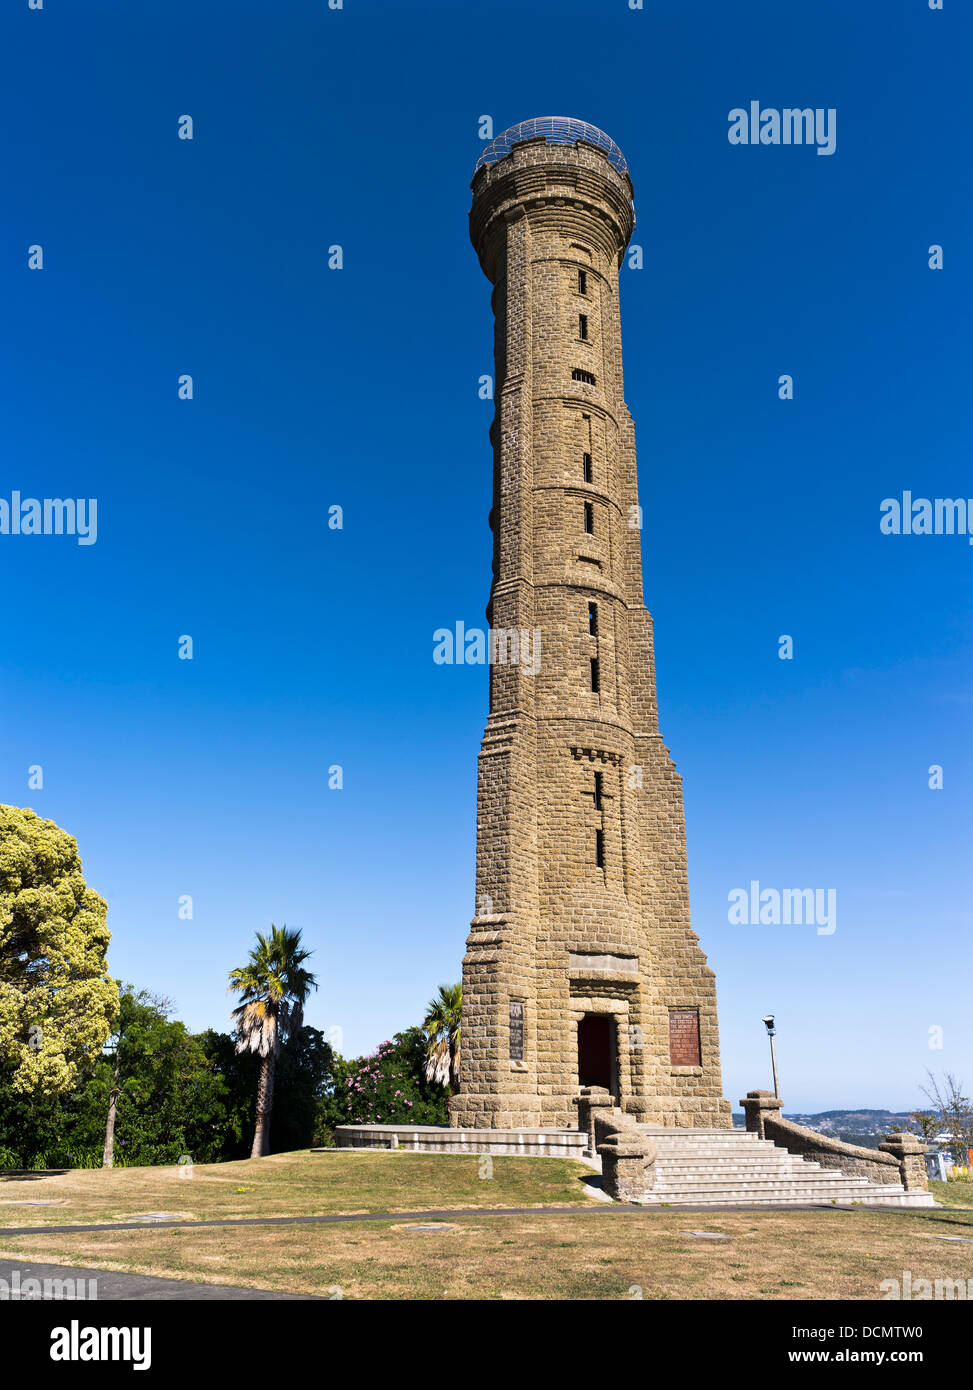 dh Durie Hill WANGANUI NEW ZEALAND War Memorial Tower Eingang und plaque Stockfoto